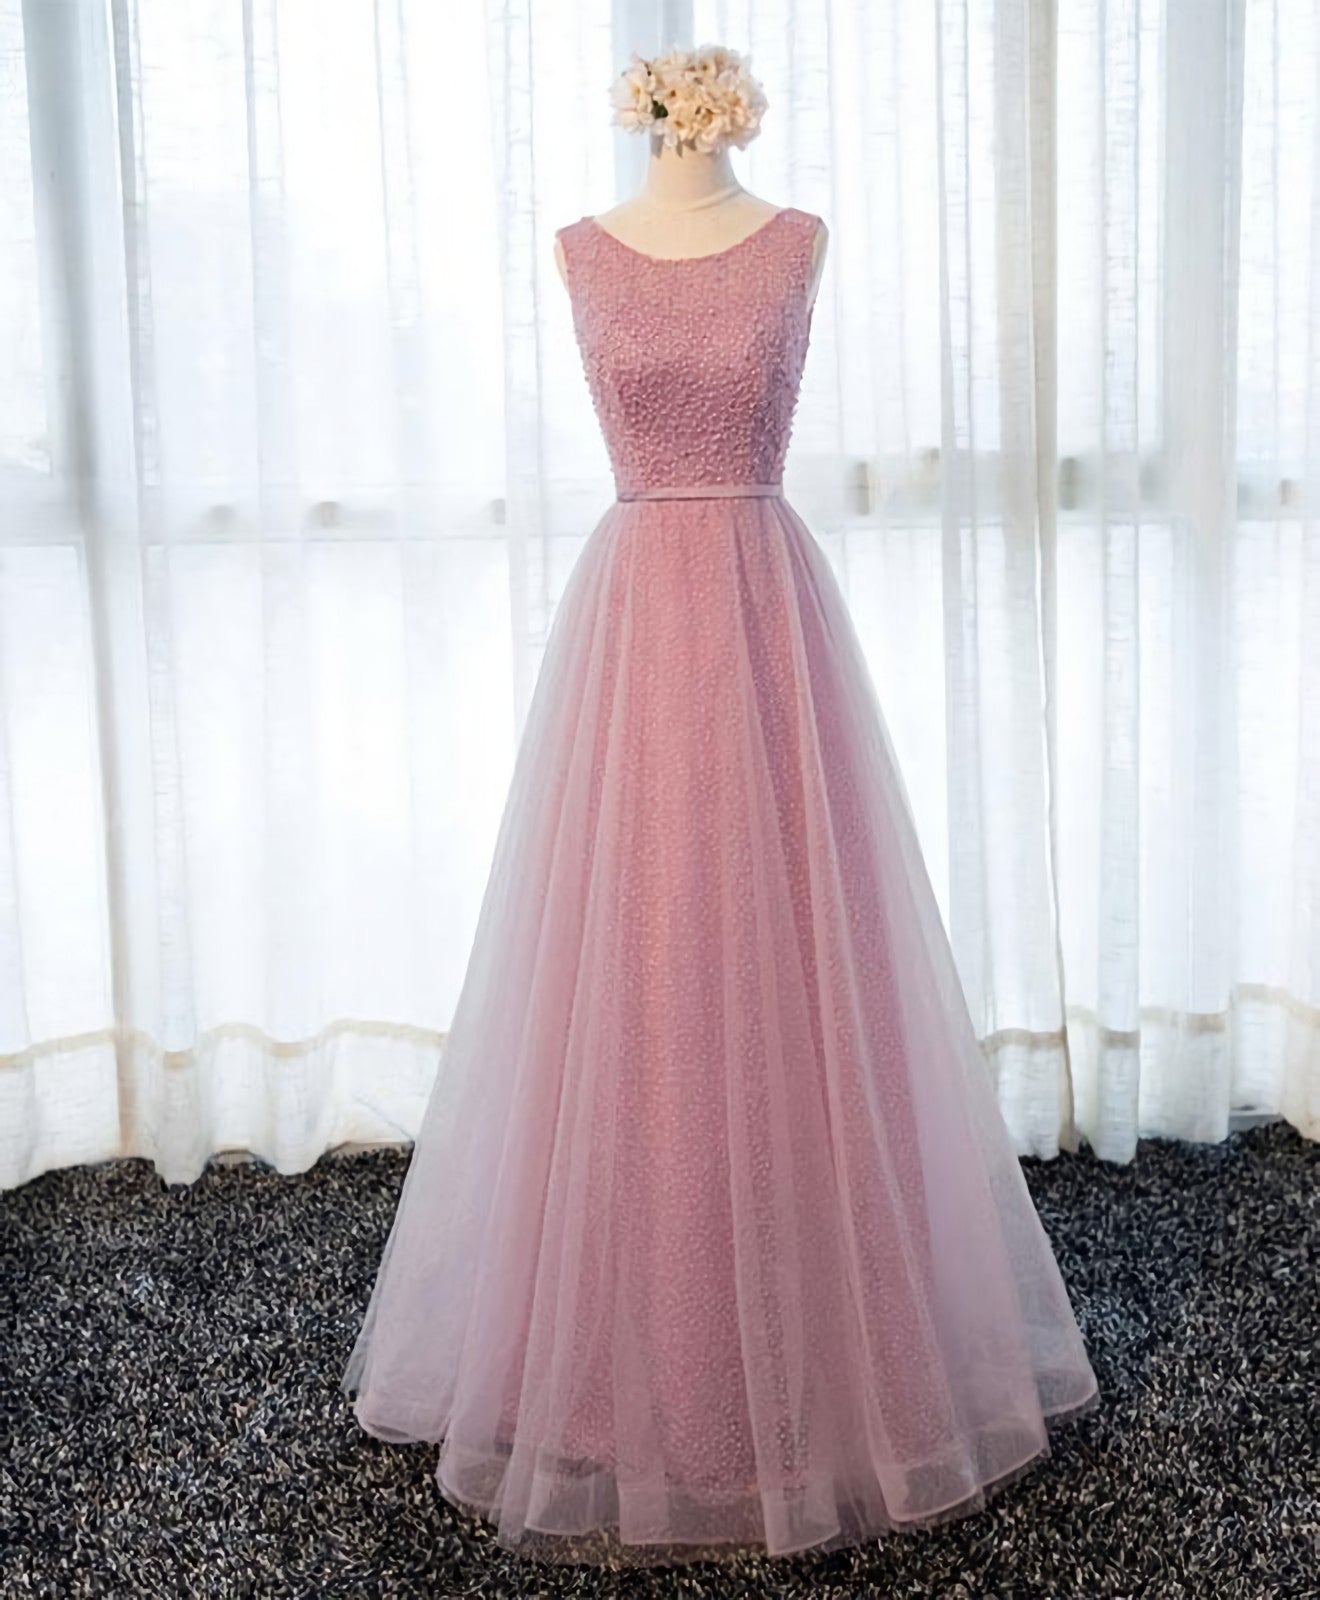 Homecoming Dresses Silk, A Line Round Neck Tulle Long Prom Dress, Lace Evening Dress